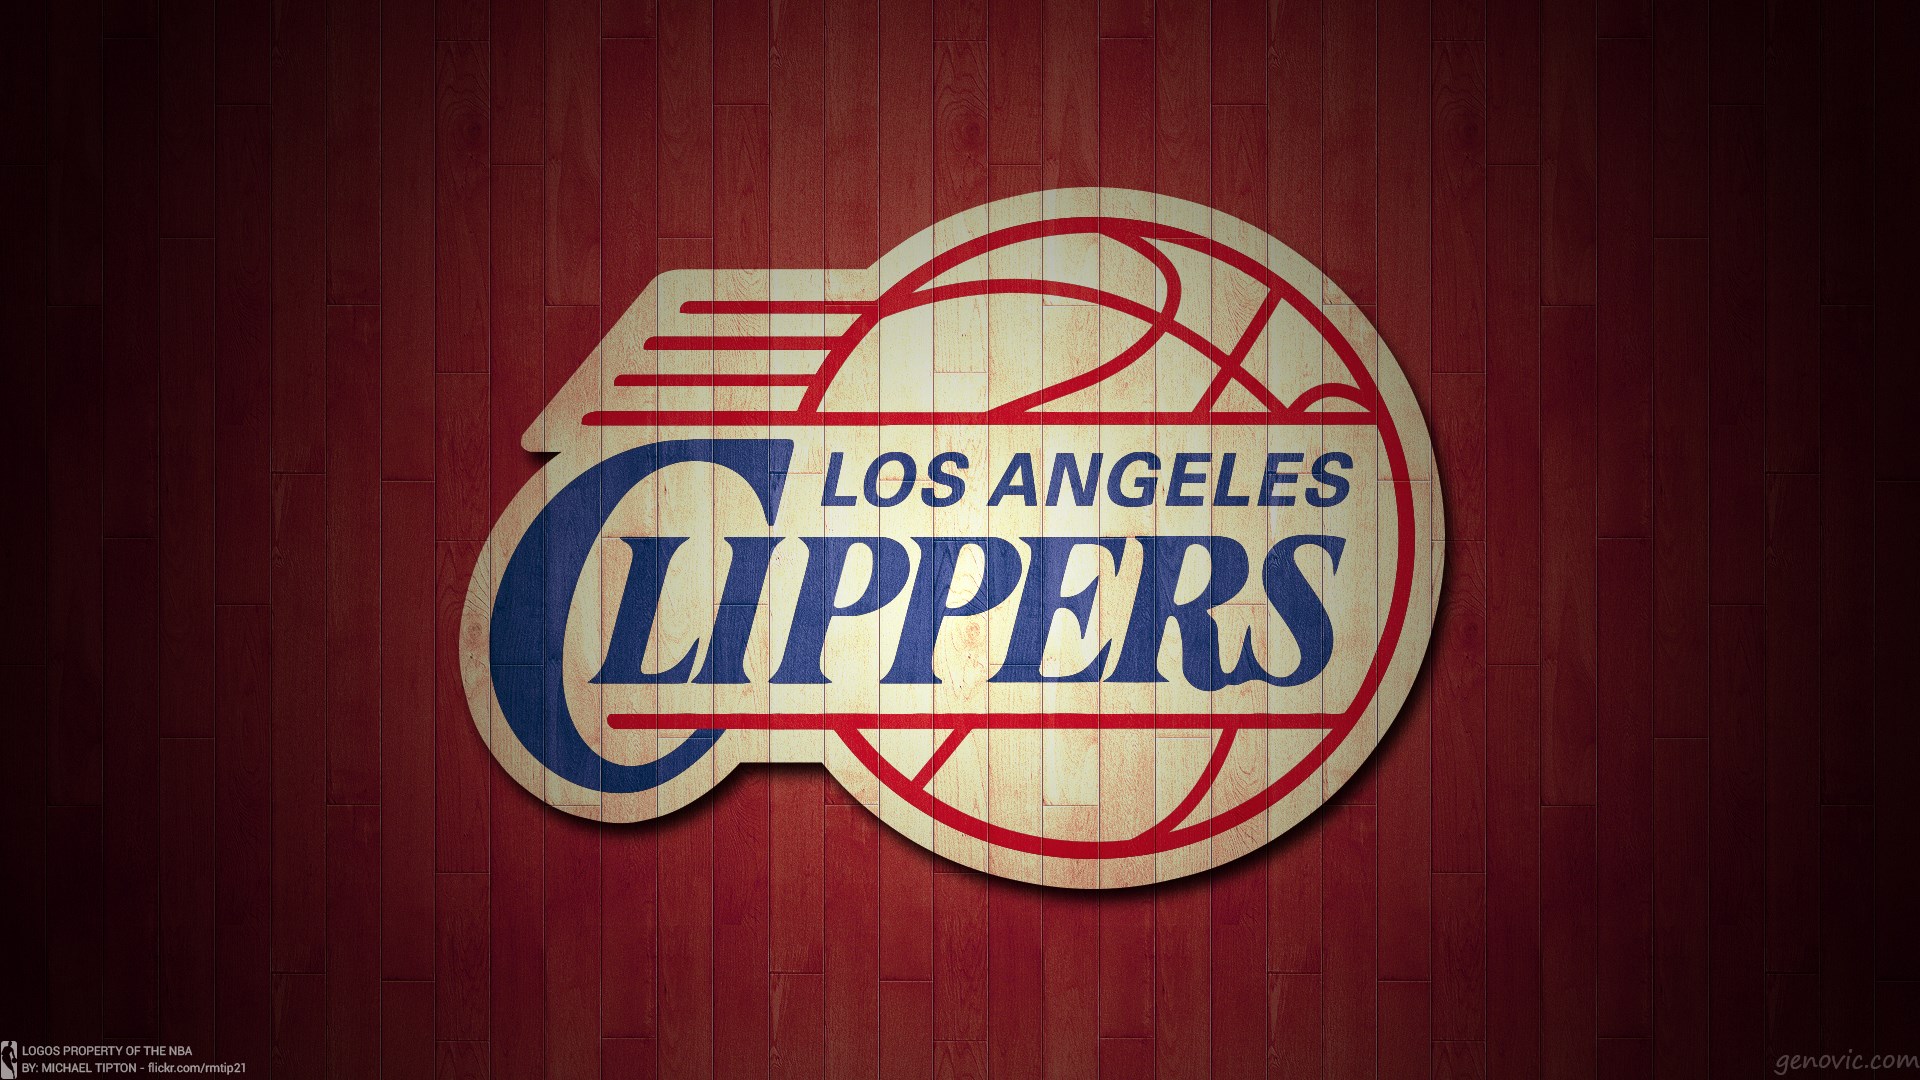  cran Los Angeles Clippers tous les wallpapers Los Angeles Clippers